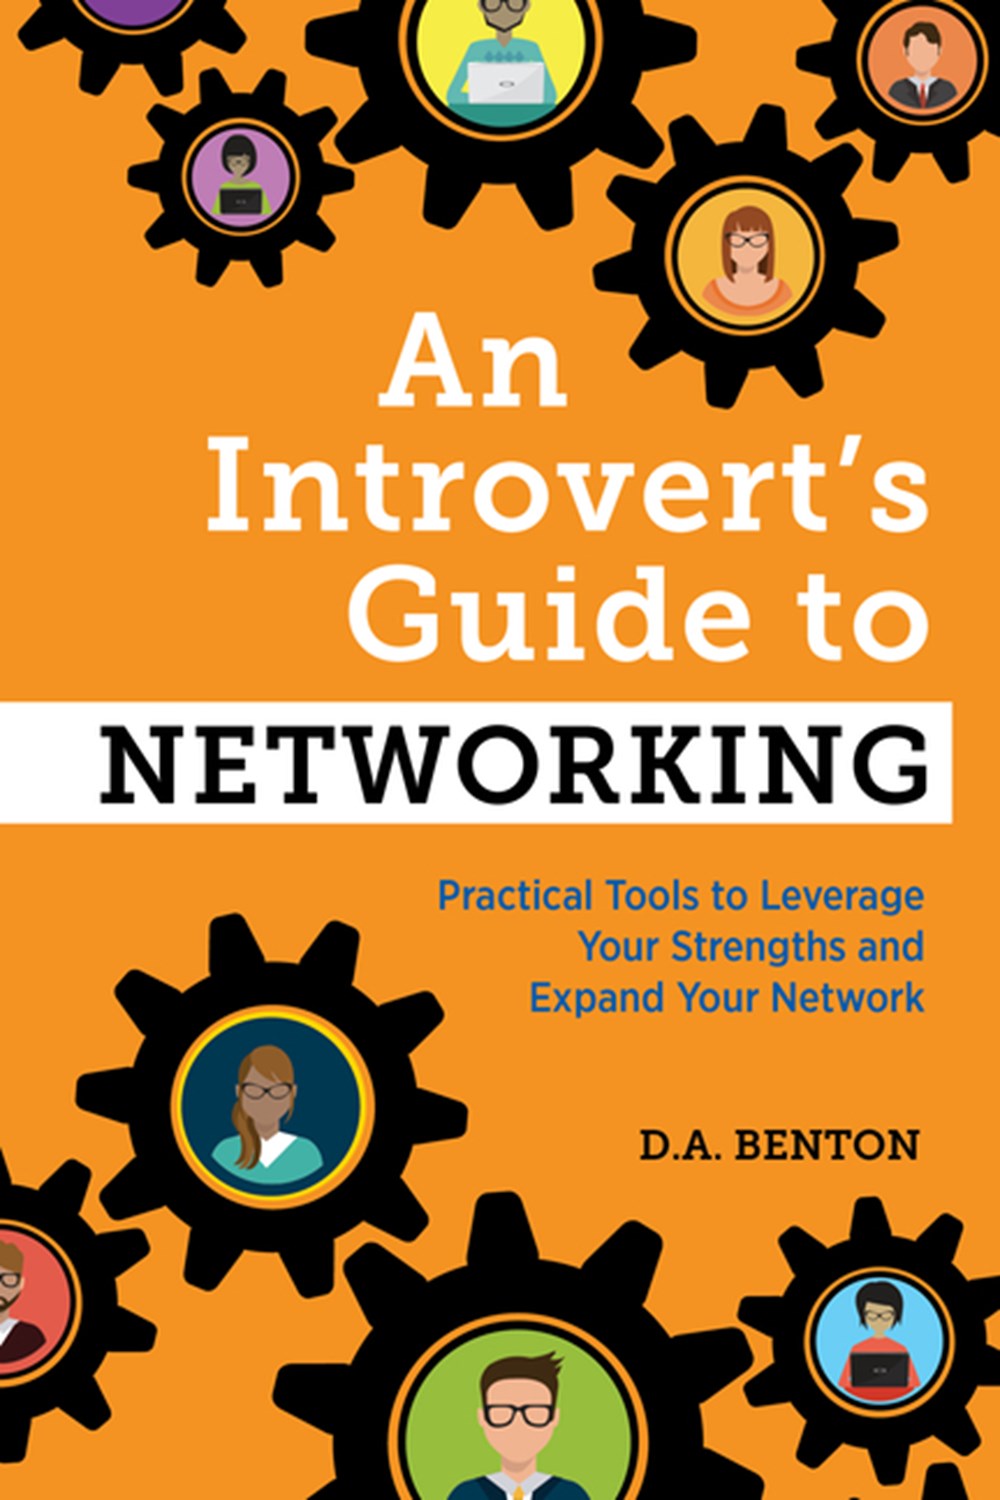 Introvert's Guide to Networking: Practical Tools to Leverage Your Strengths and Expand Your Network